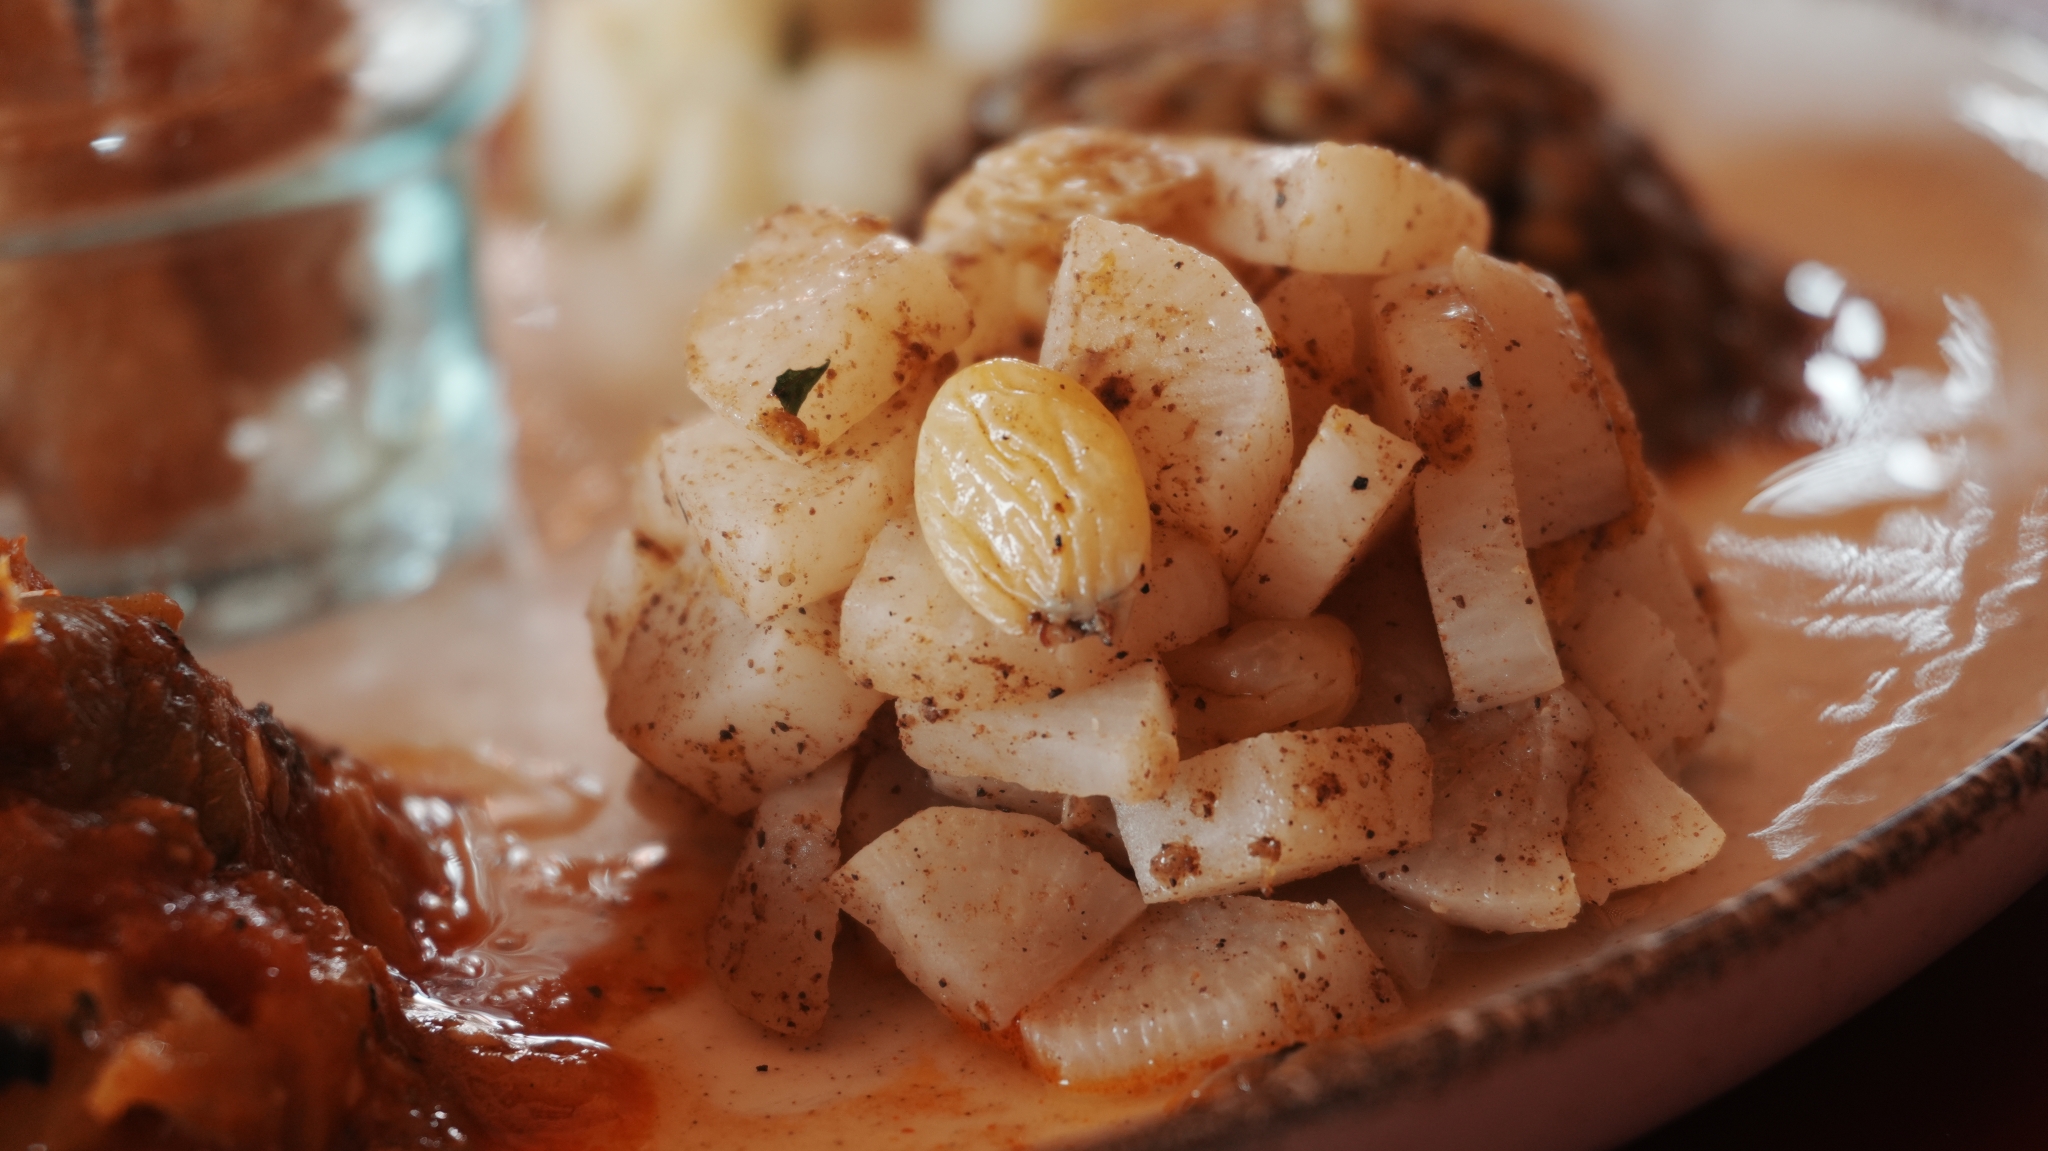 Sample image of a Moroccan cuisine taken at the minimum focus distance of the lens, showing resolution and bokeh